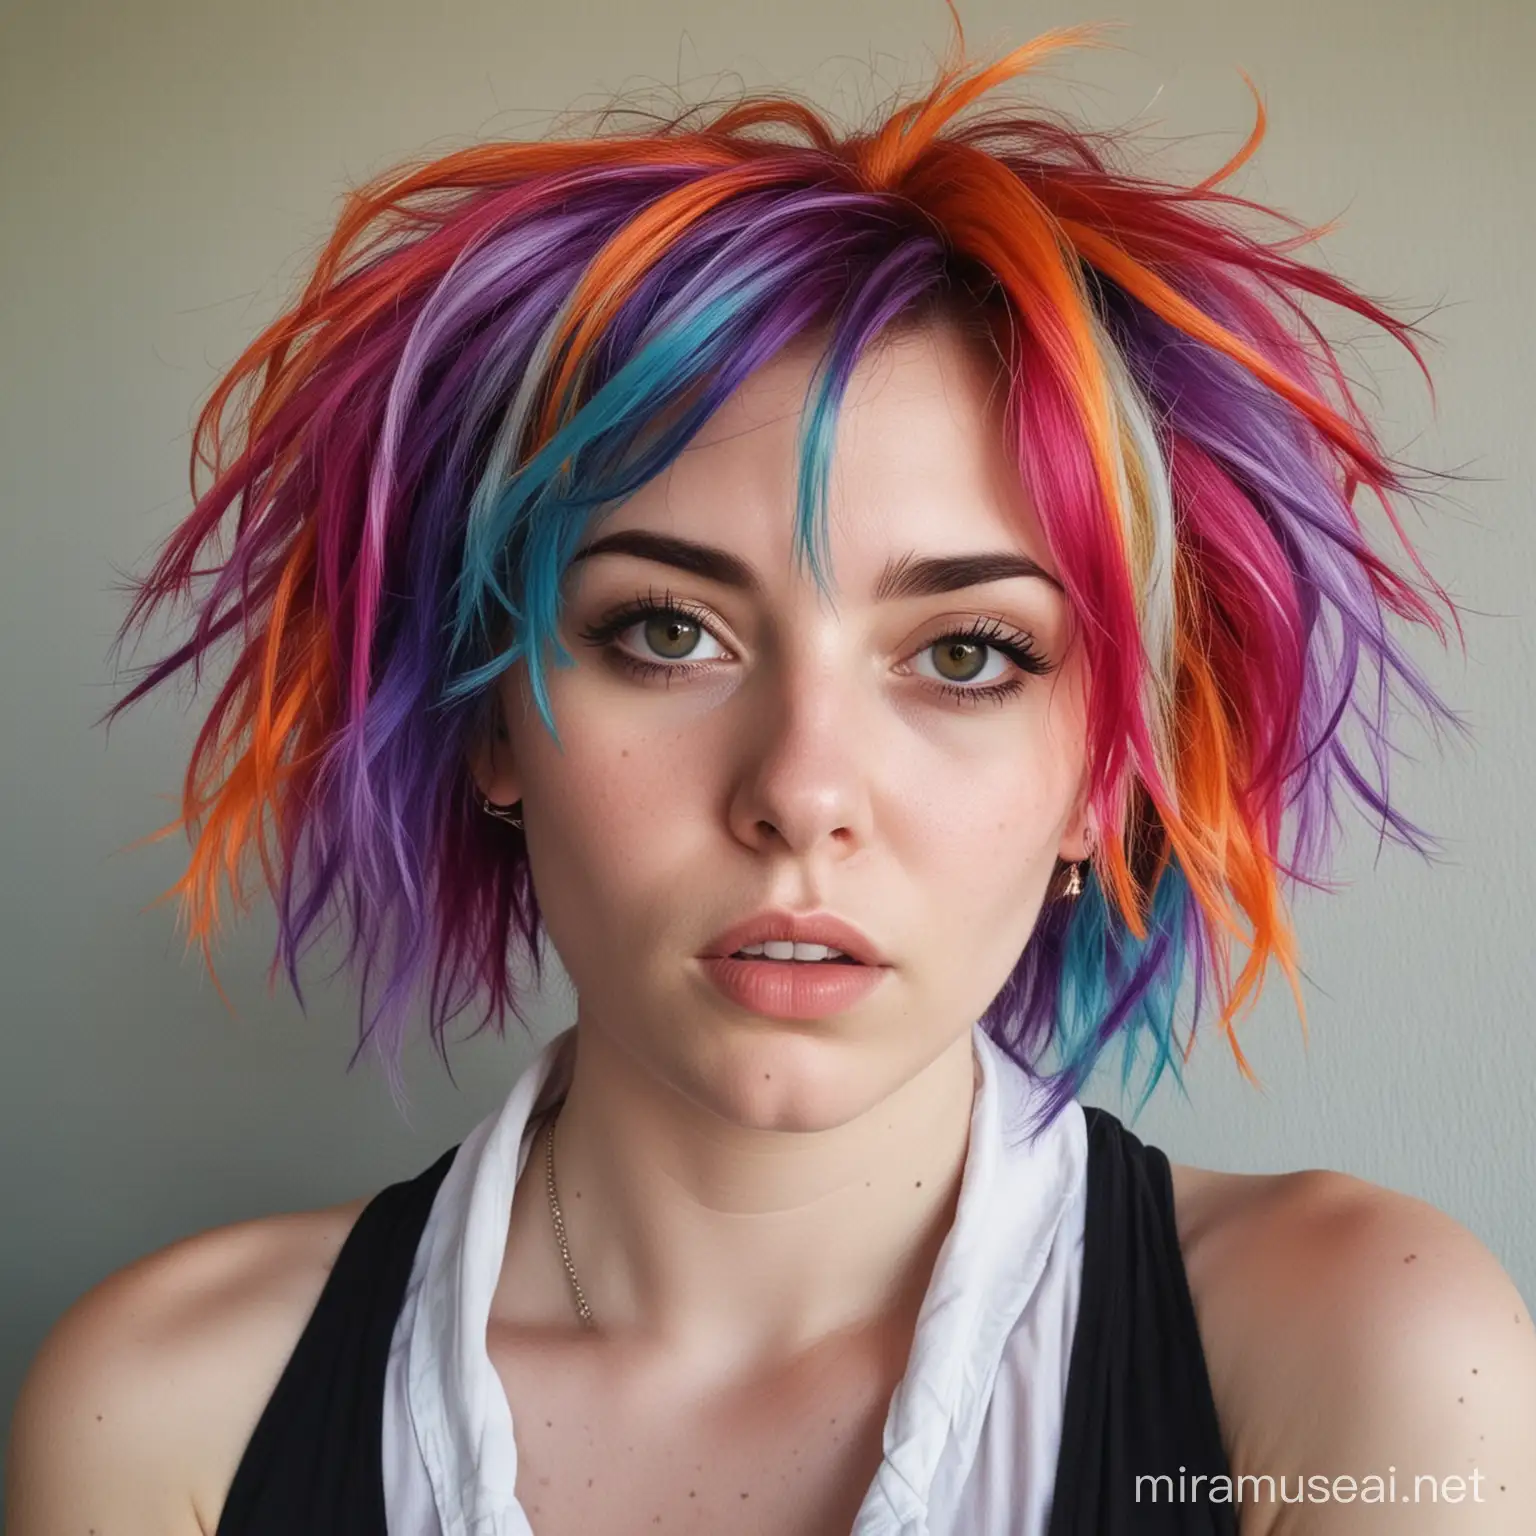 Poet, crazy, colored hair